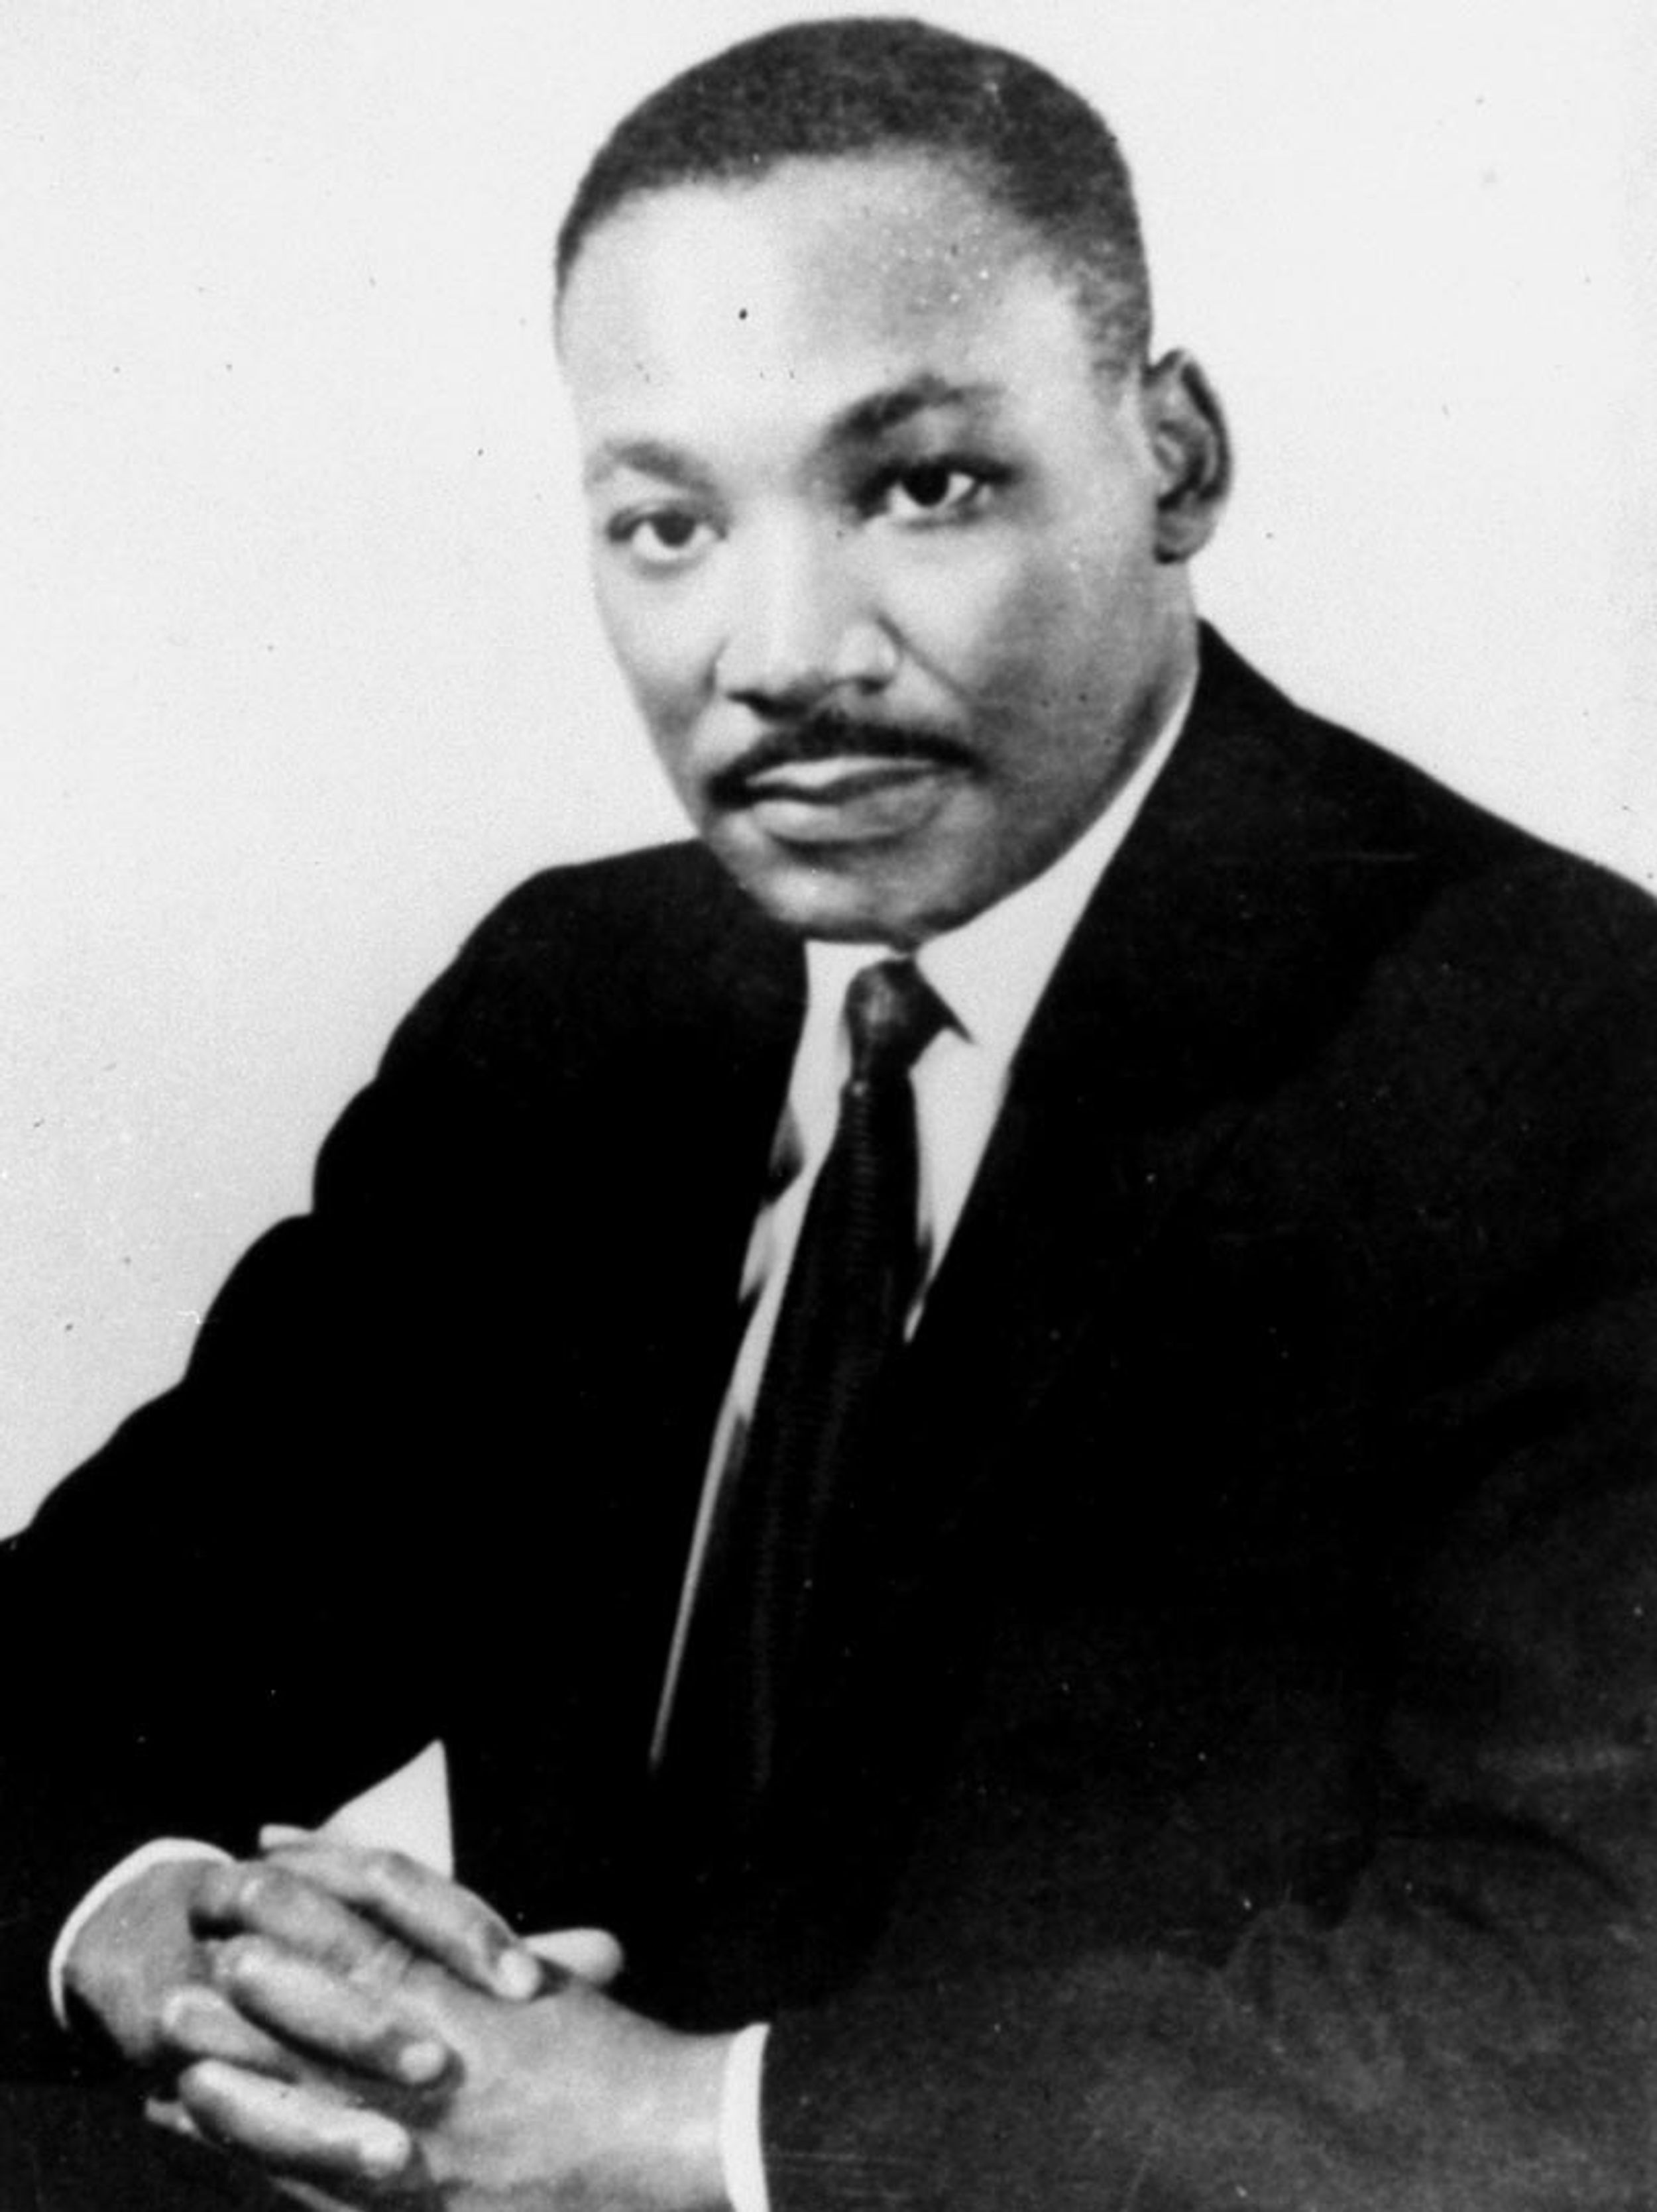 Why Was Martin Luther King Jr. Murdered?